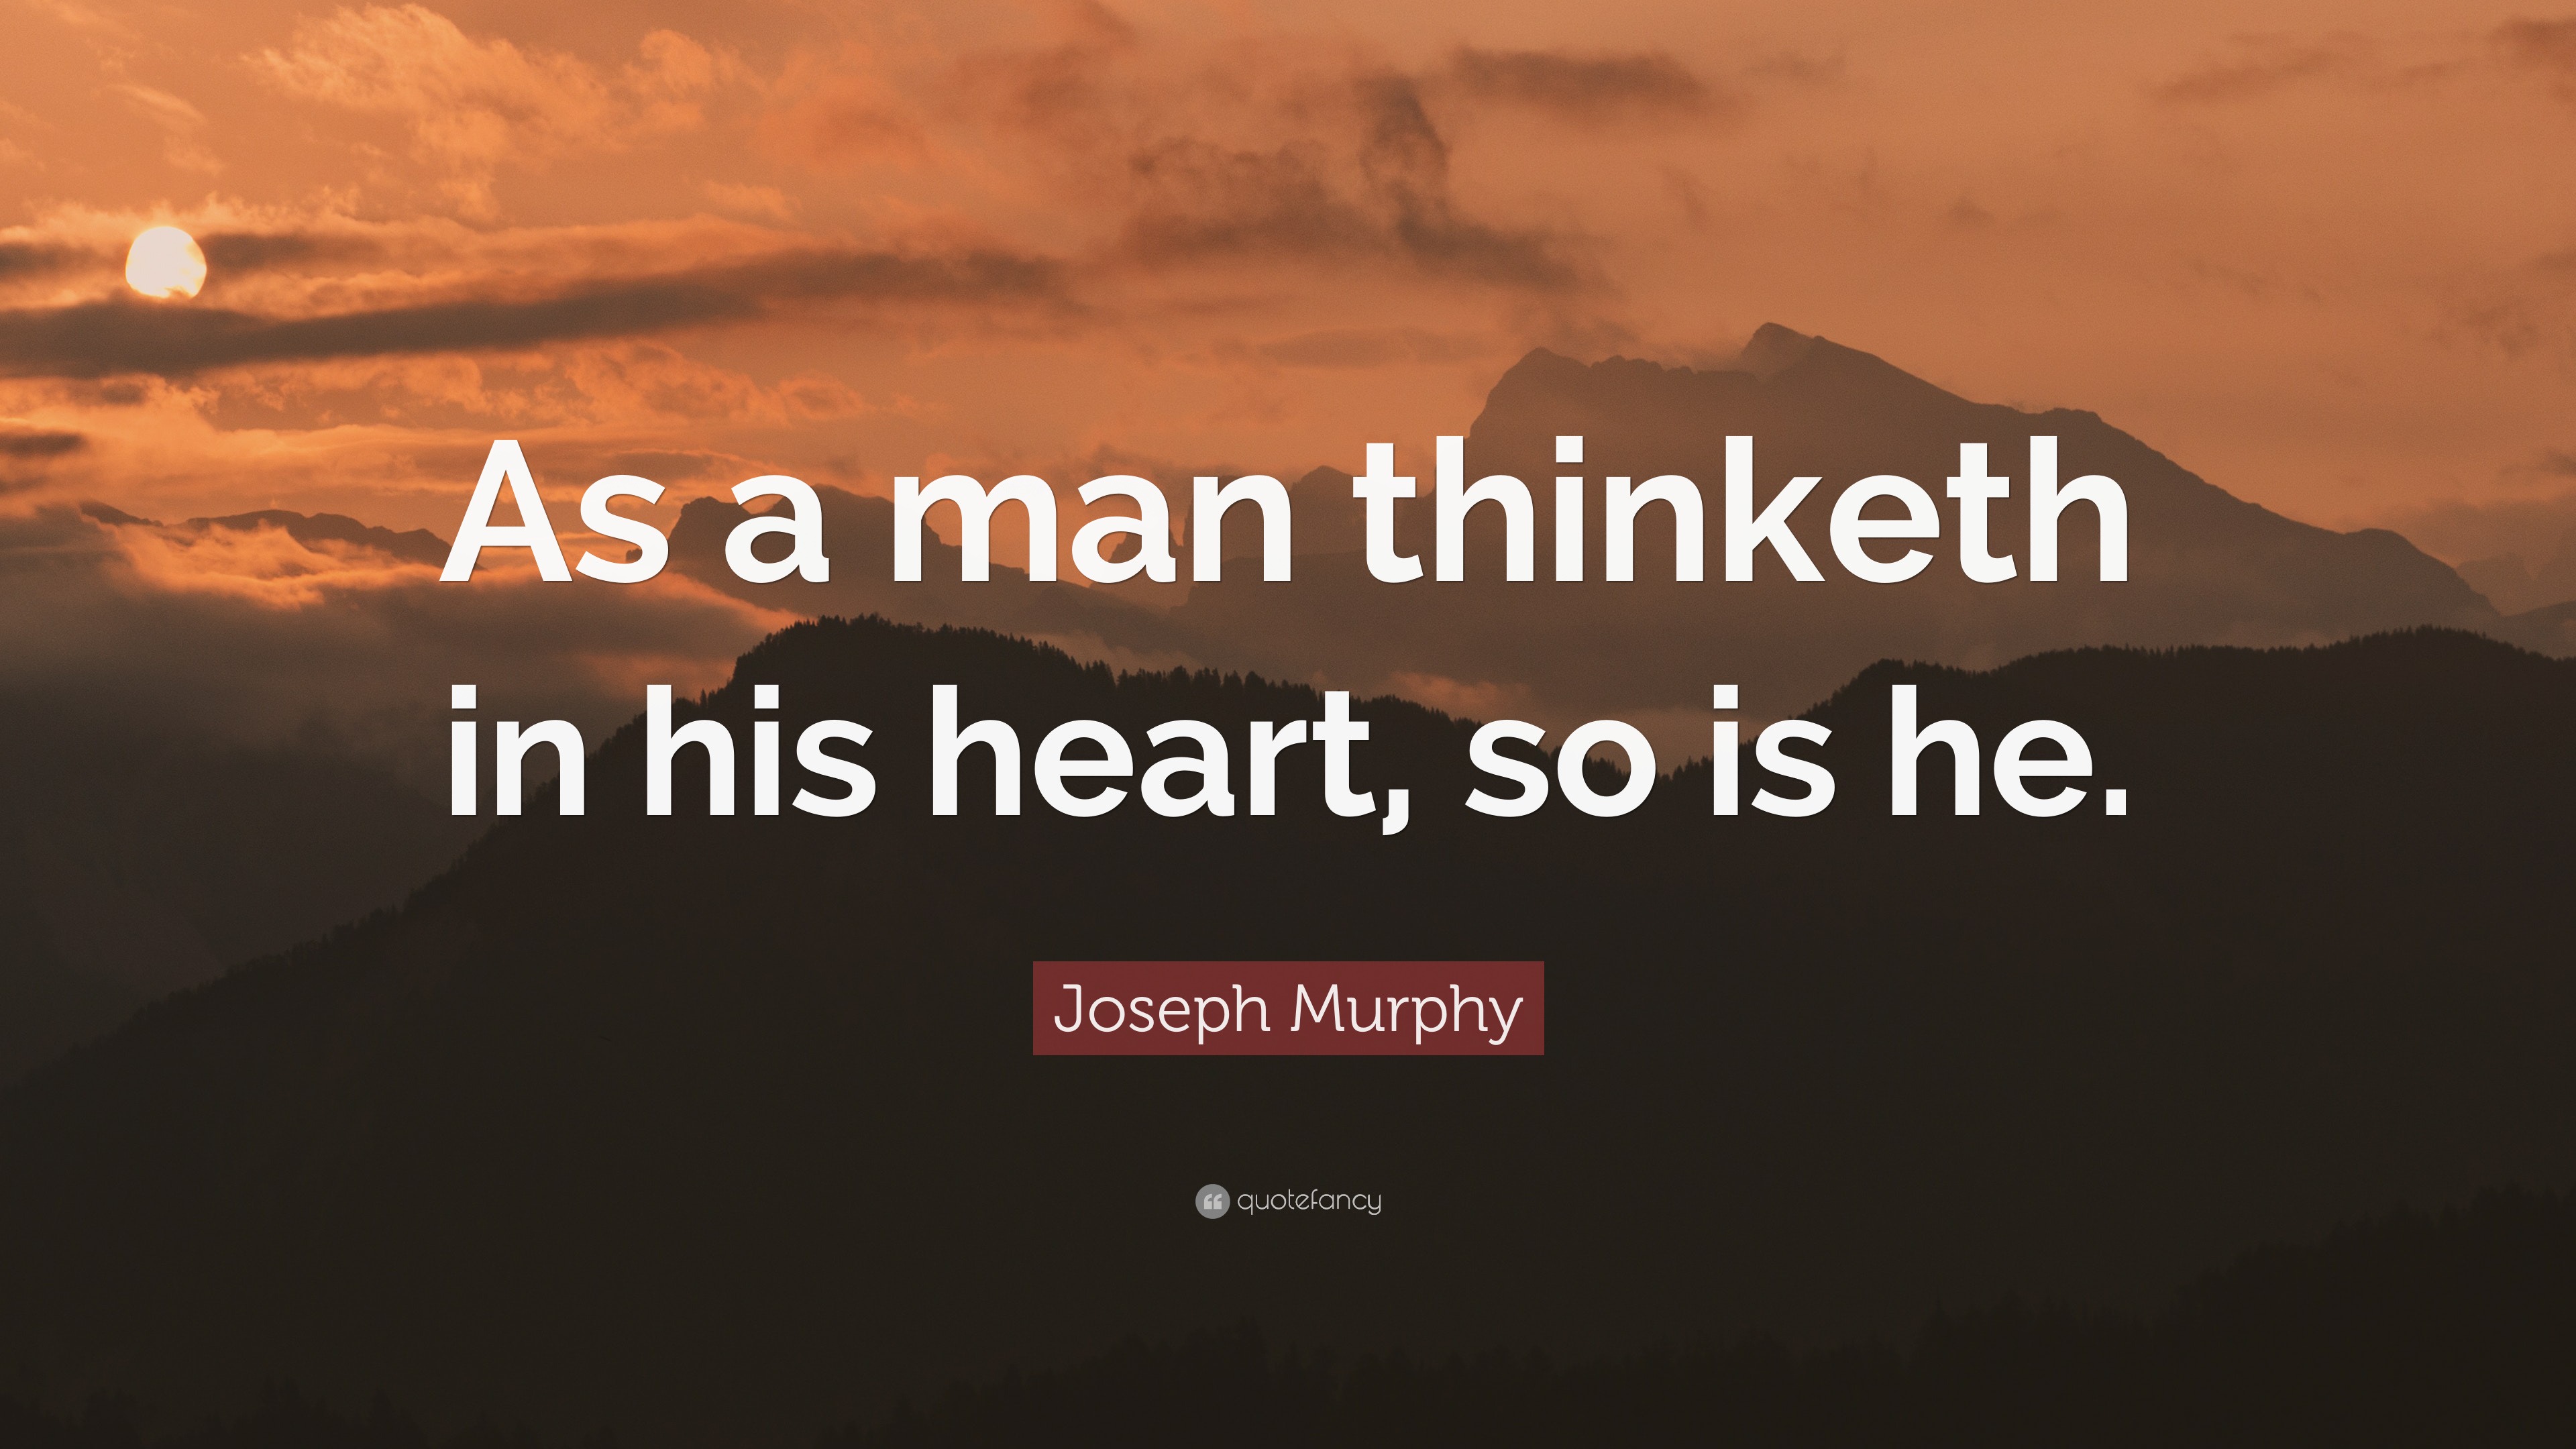 Joseph Murphy Quote: "As a man thinketh in his heart, so is he."